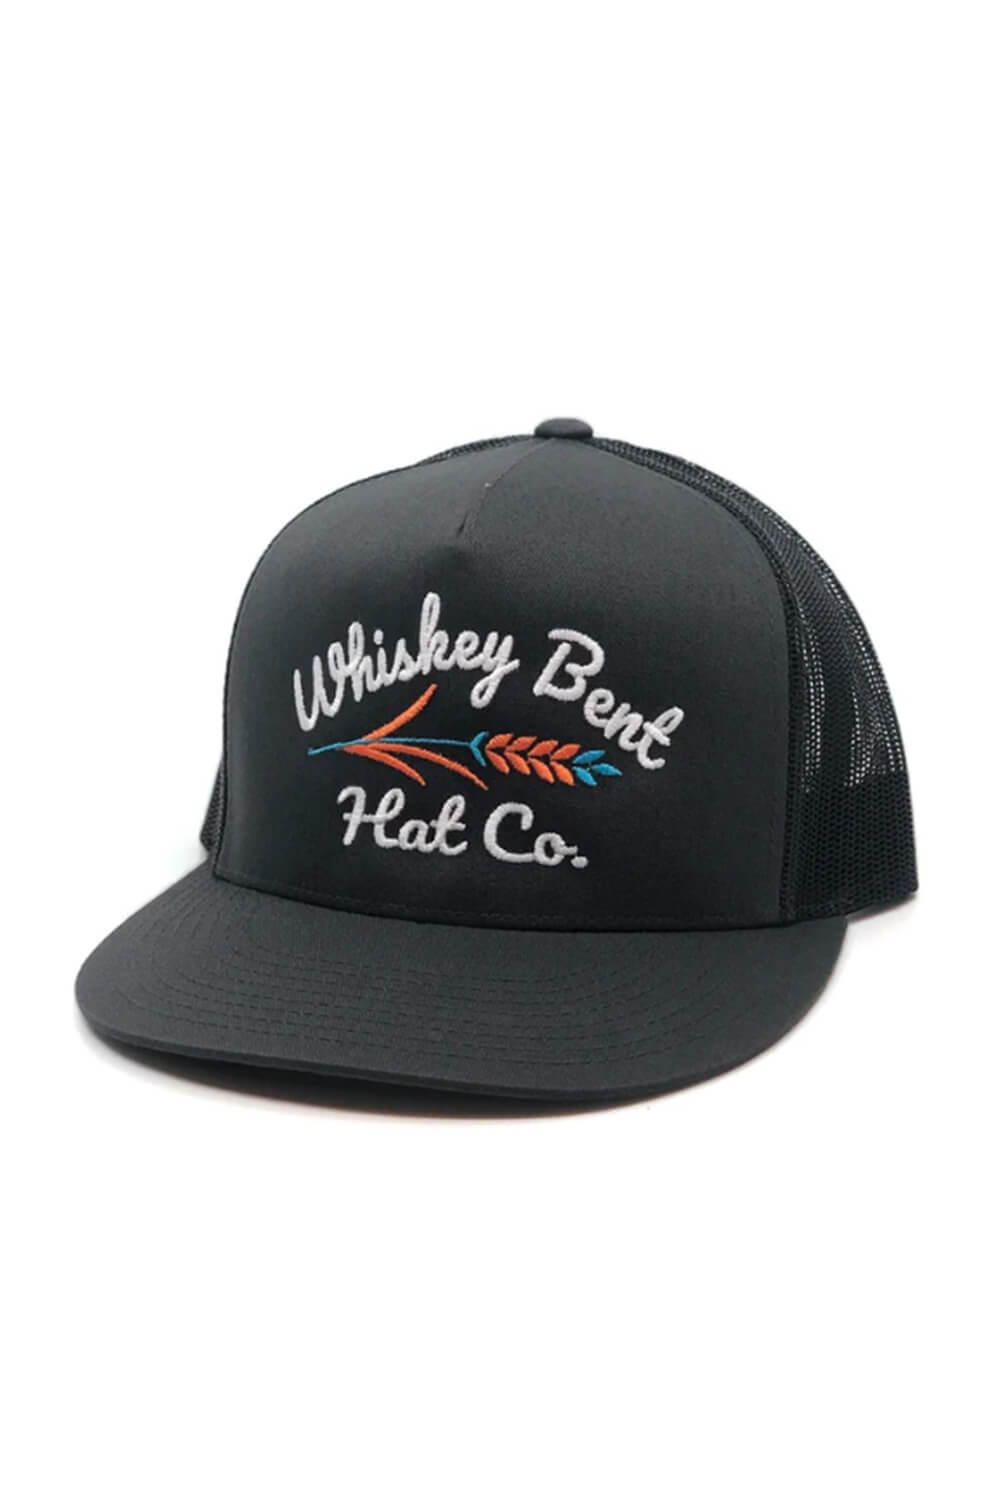 Whiskey Bent Troubador Trucker Hat for Men in Charcoal at Glik's , Os